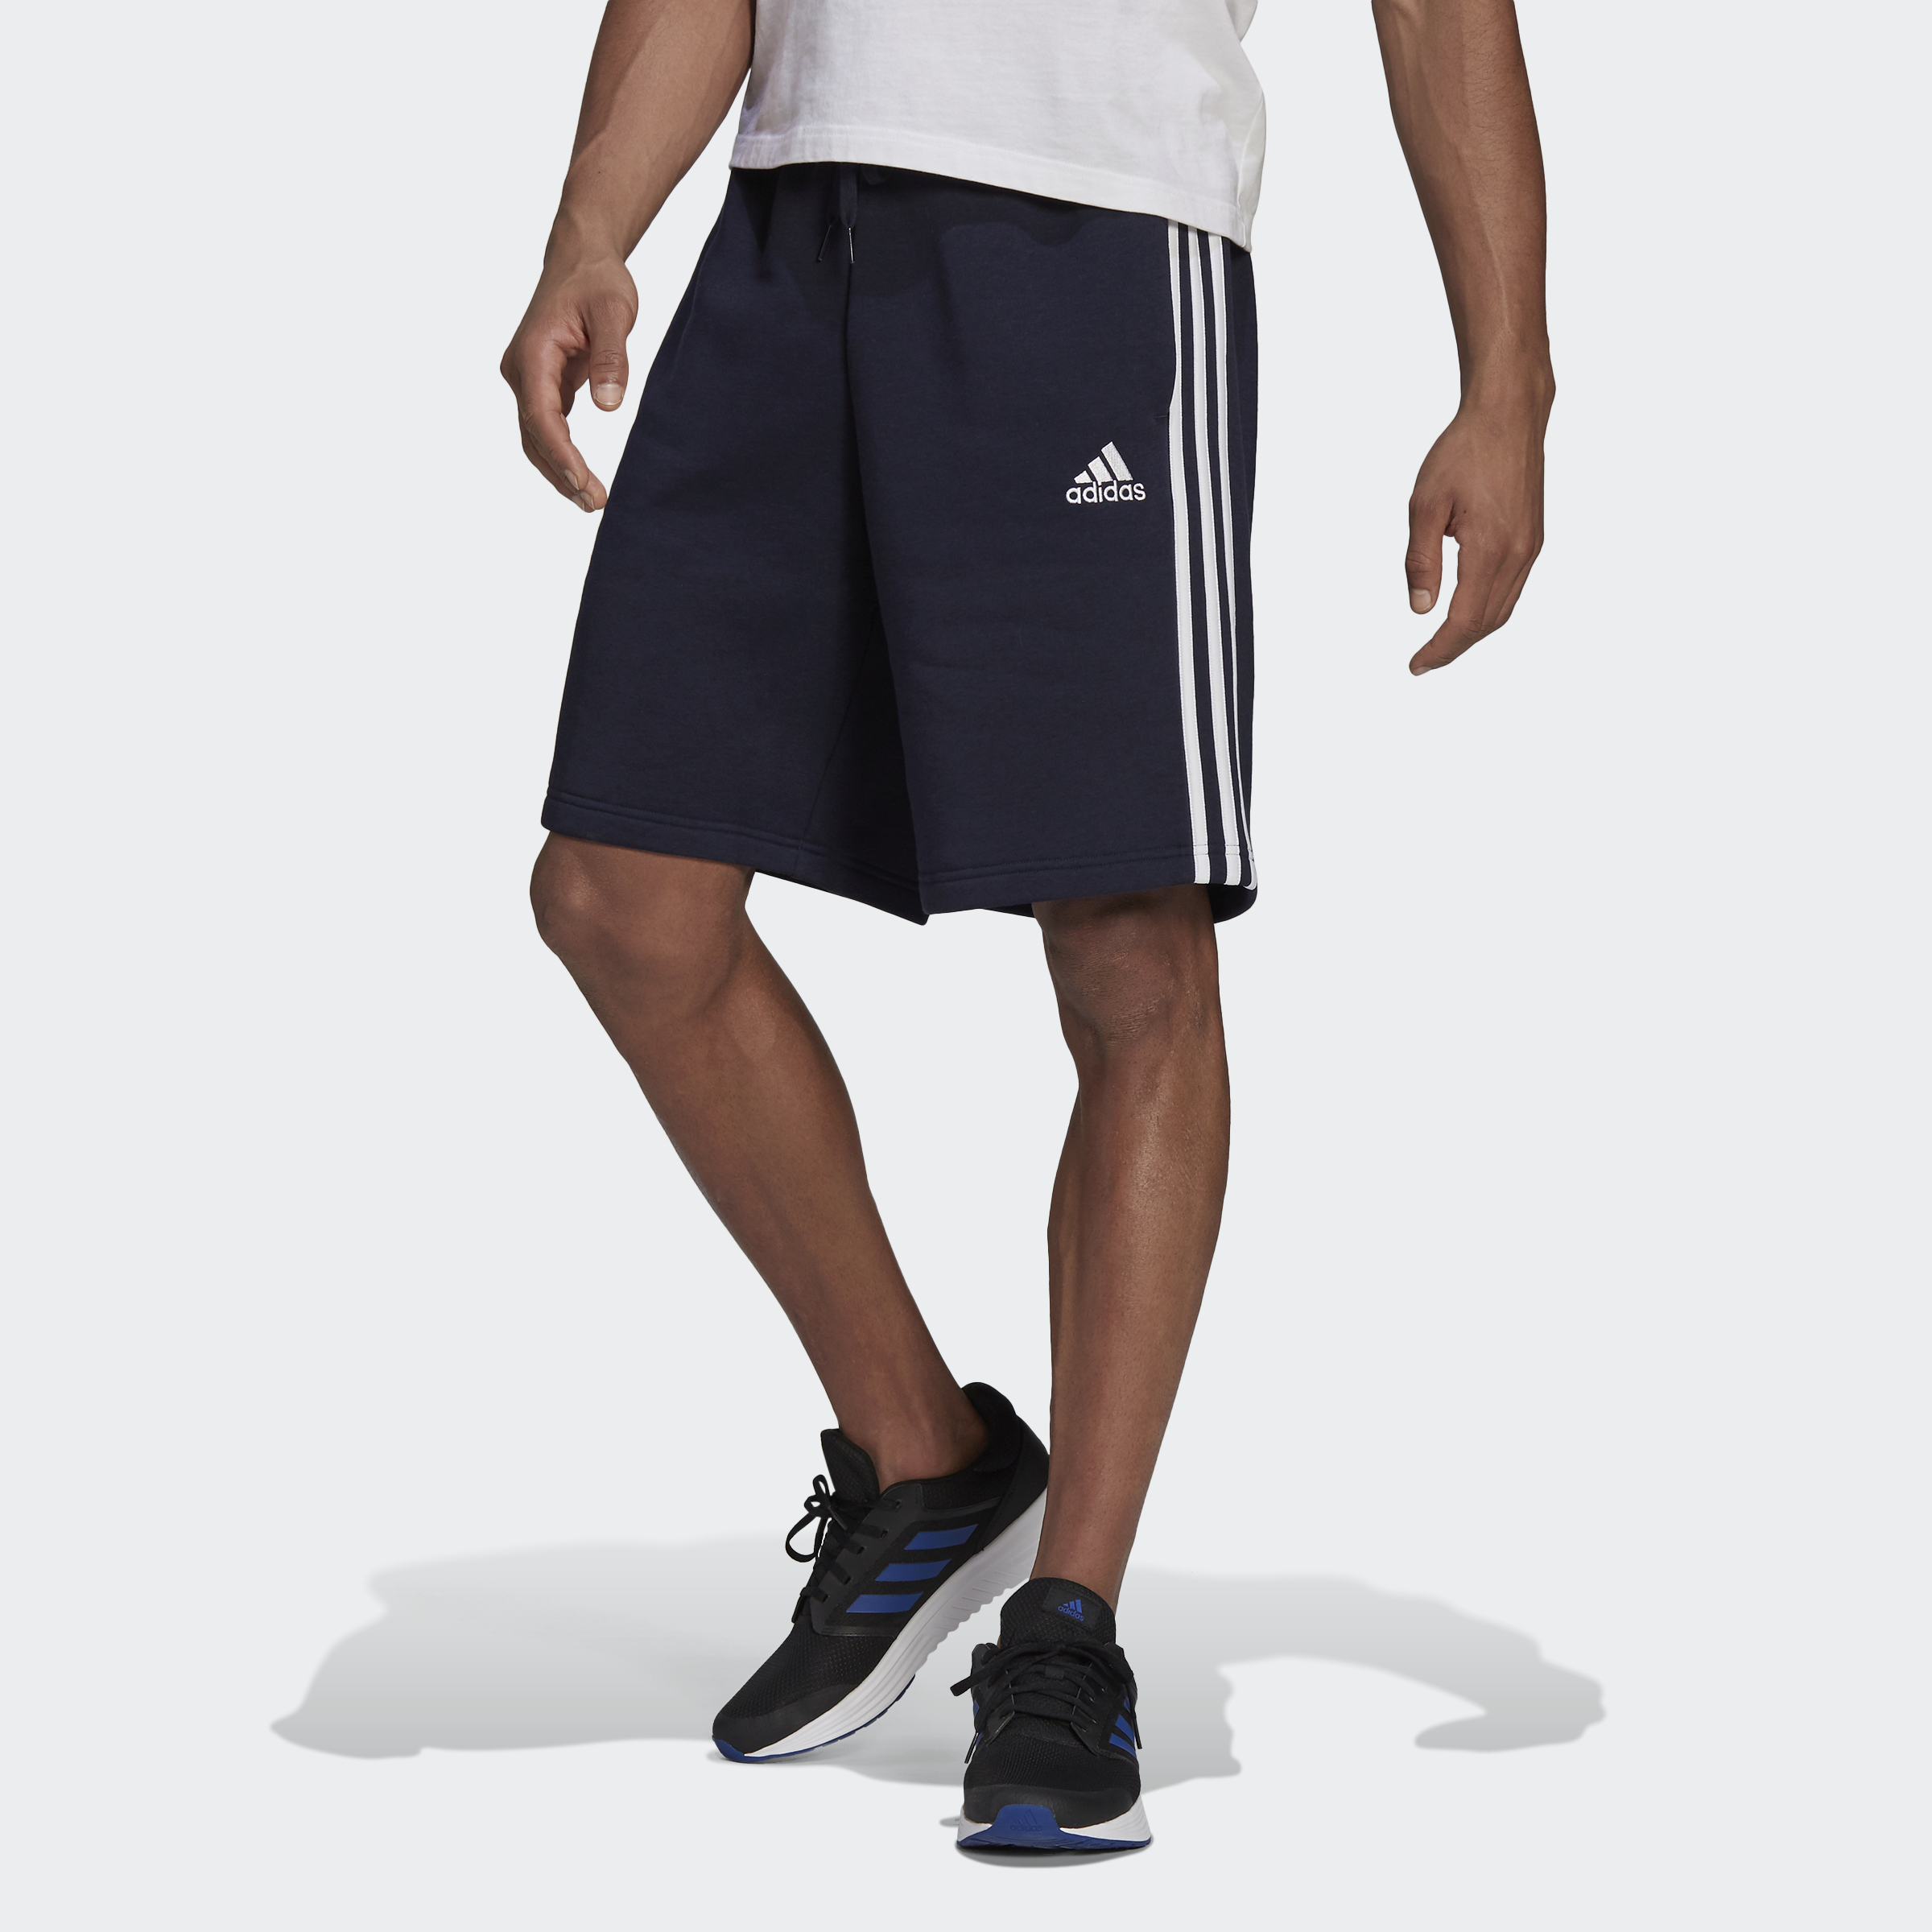 adidas Men's Sport Basketball Pants 2 for $29.90 ($14.95 each), Essentials Fleece 3-Stripes Shorts 2 for $23.40 ($11.70 each) + Free Shipping